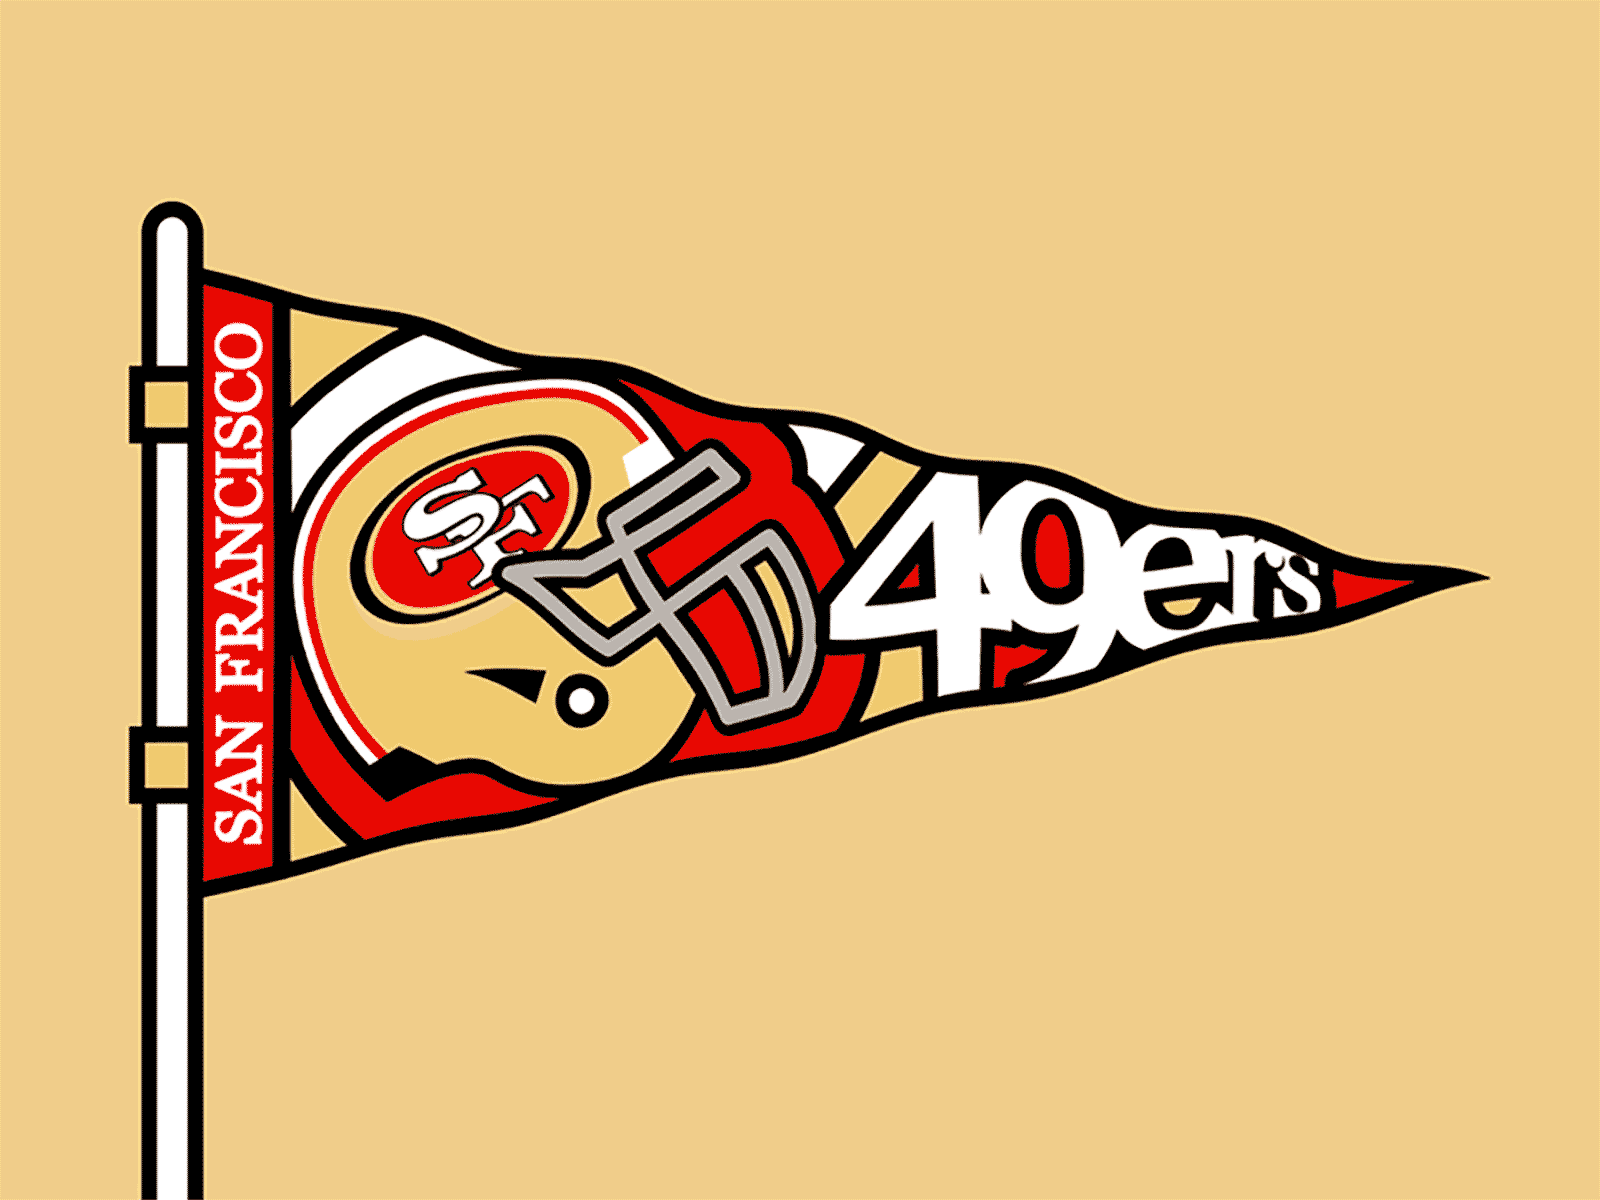 San Francisco 49ers Pennant 49ers after effects animated animation flag football gold illustration niners pennant red san francisco sports vector vectors waving weekly warm up west